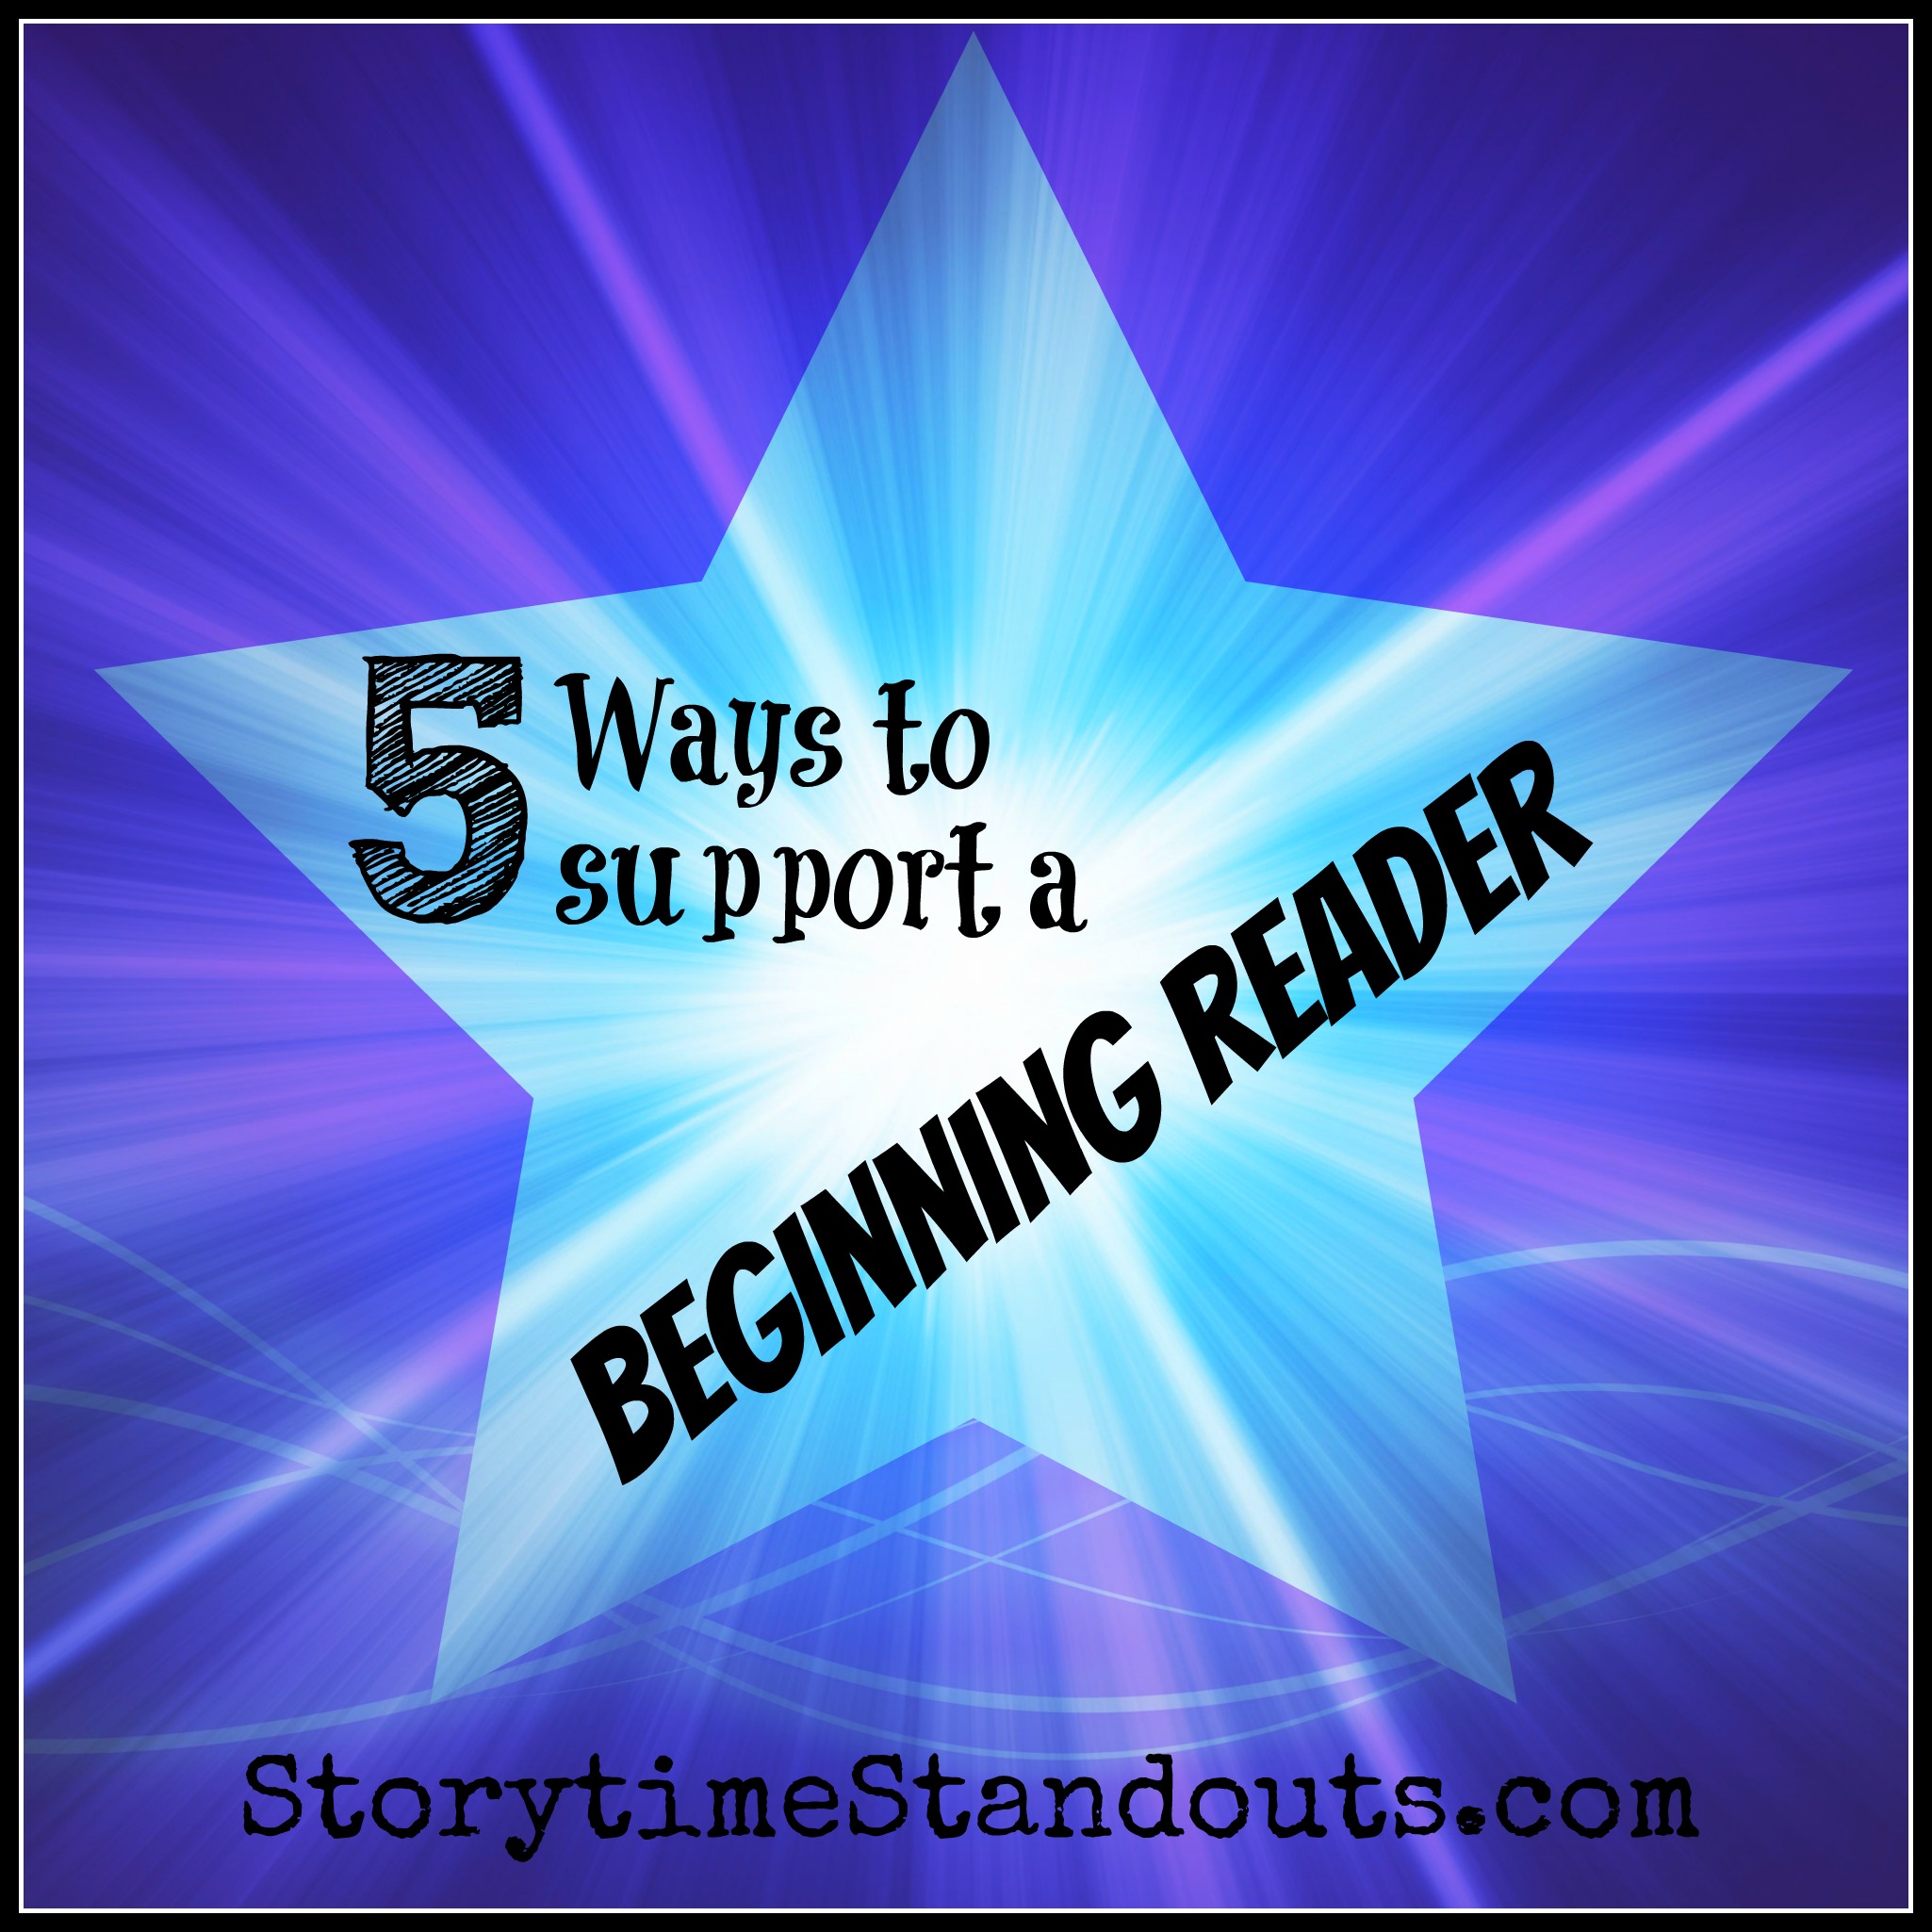 5 Ways to Support a Beginning Reader from StorytimeStandouts.com